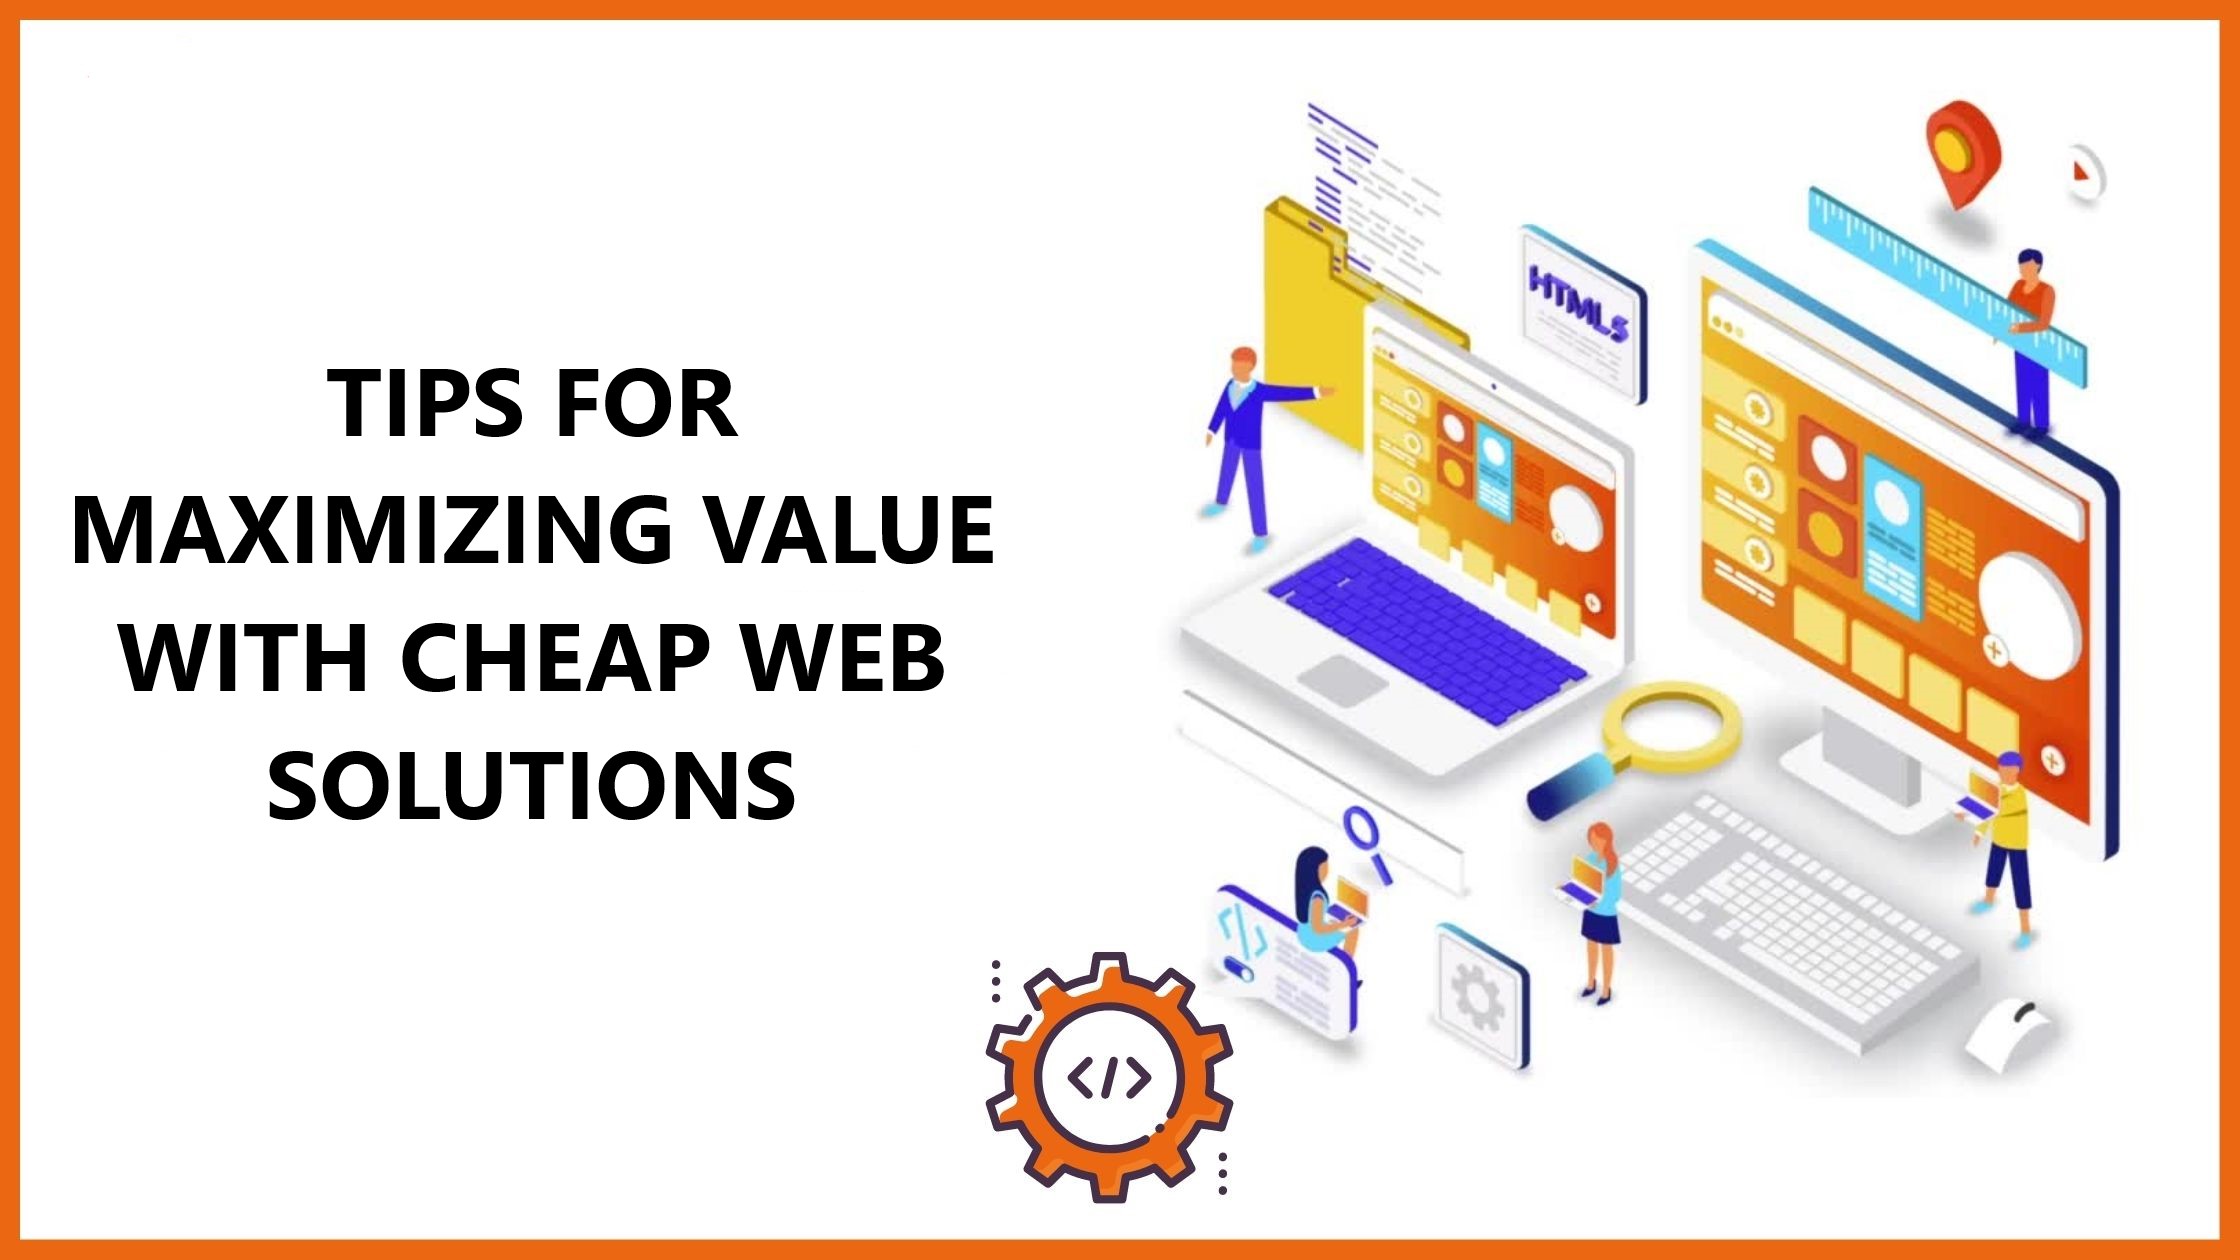 Tips for Maximizing Value with Cheap Web Solutions